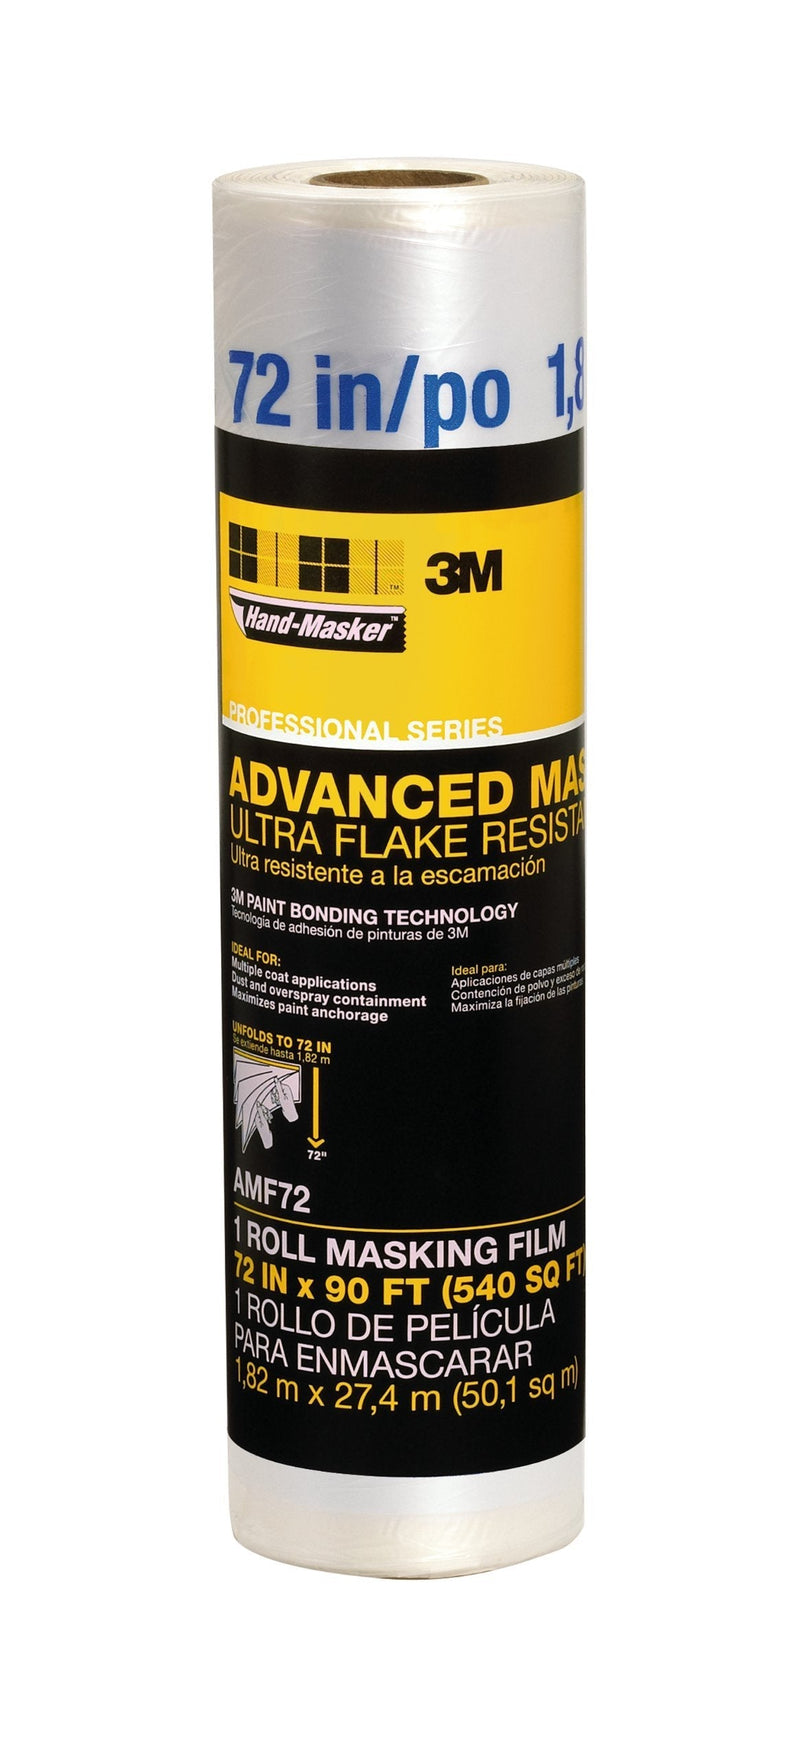  [AUSTRALIA] - Hand-Masker AMF72 Advanced Film Masking fim, Surface protecter, Dust barrier, 72-Inch, Clear 72 Inch